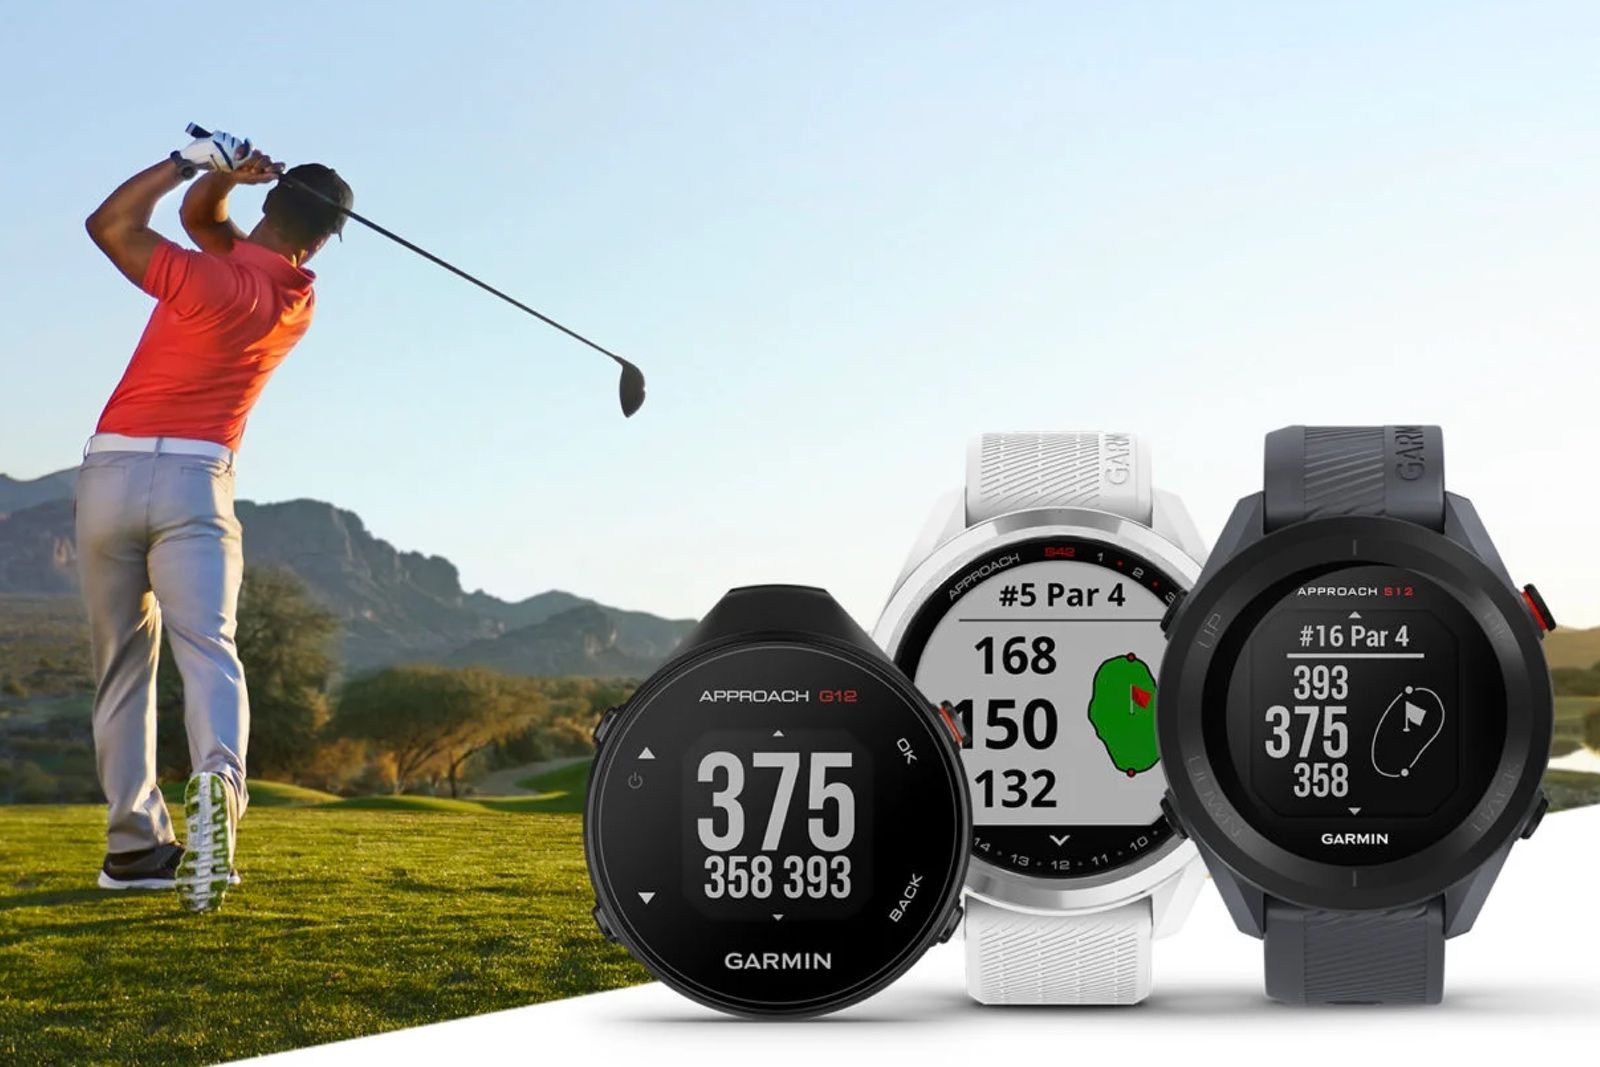 Garmin updates its golf wearables for 2021 - Approach S42, S12 and G12 all announced photo 1